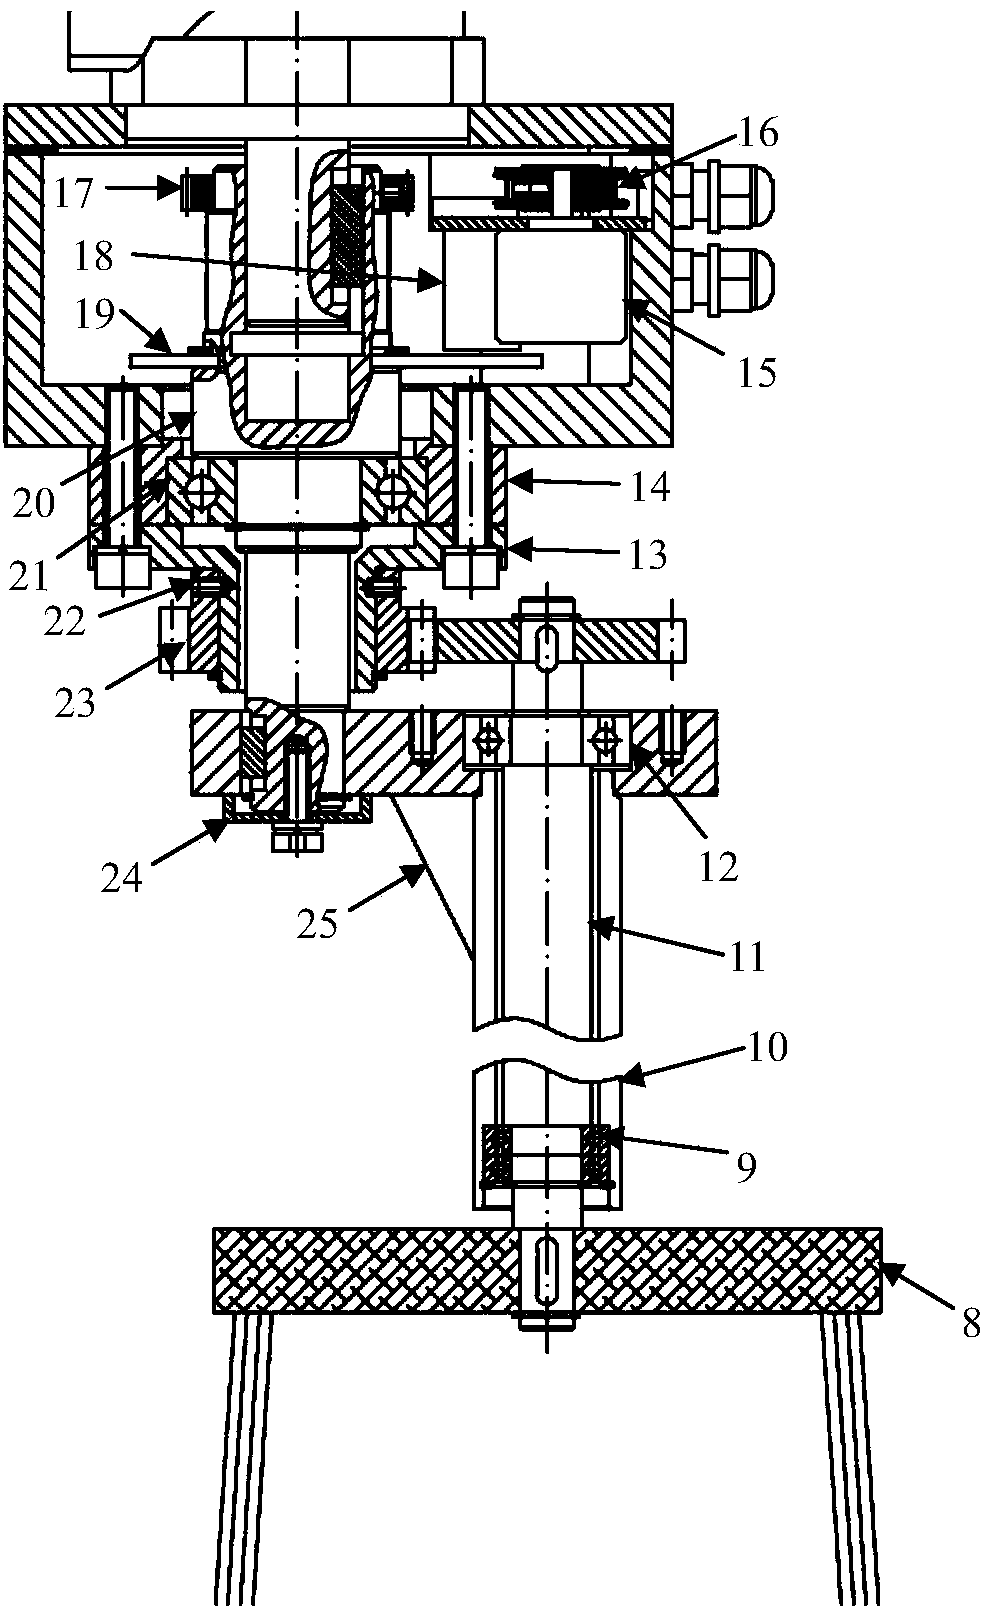 Planetary brush type inter-plant hoeing device